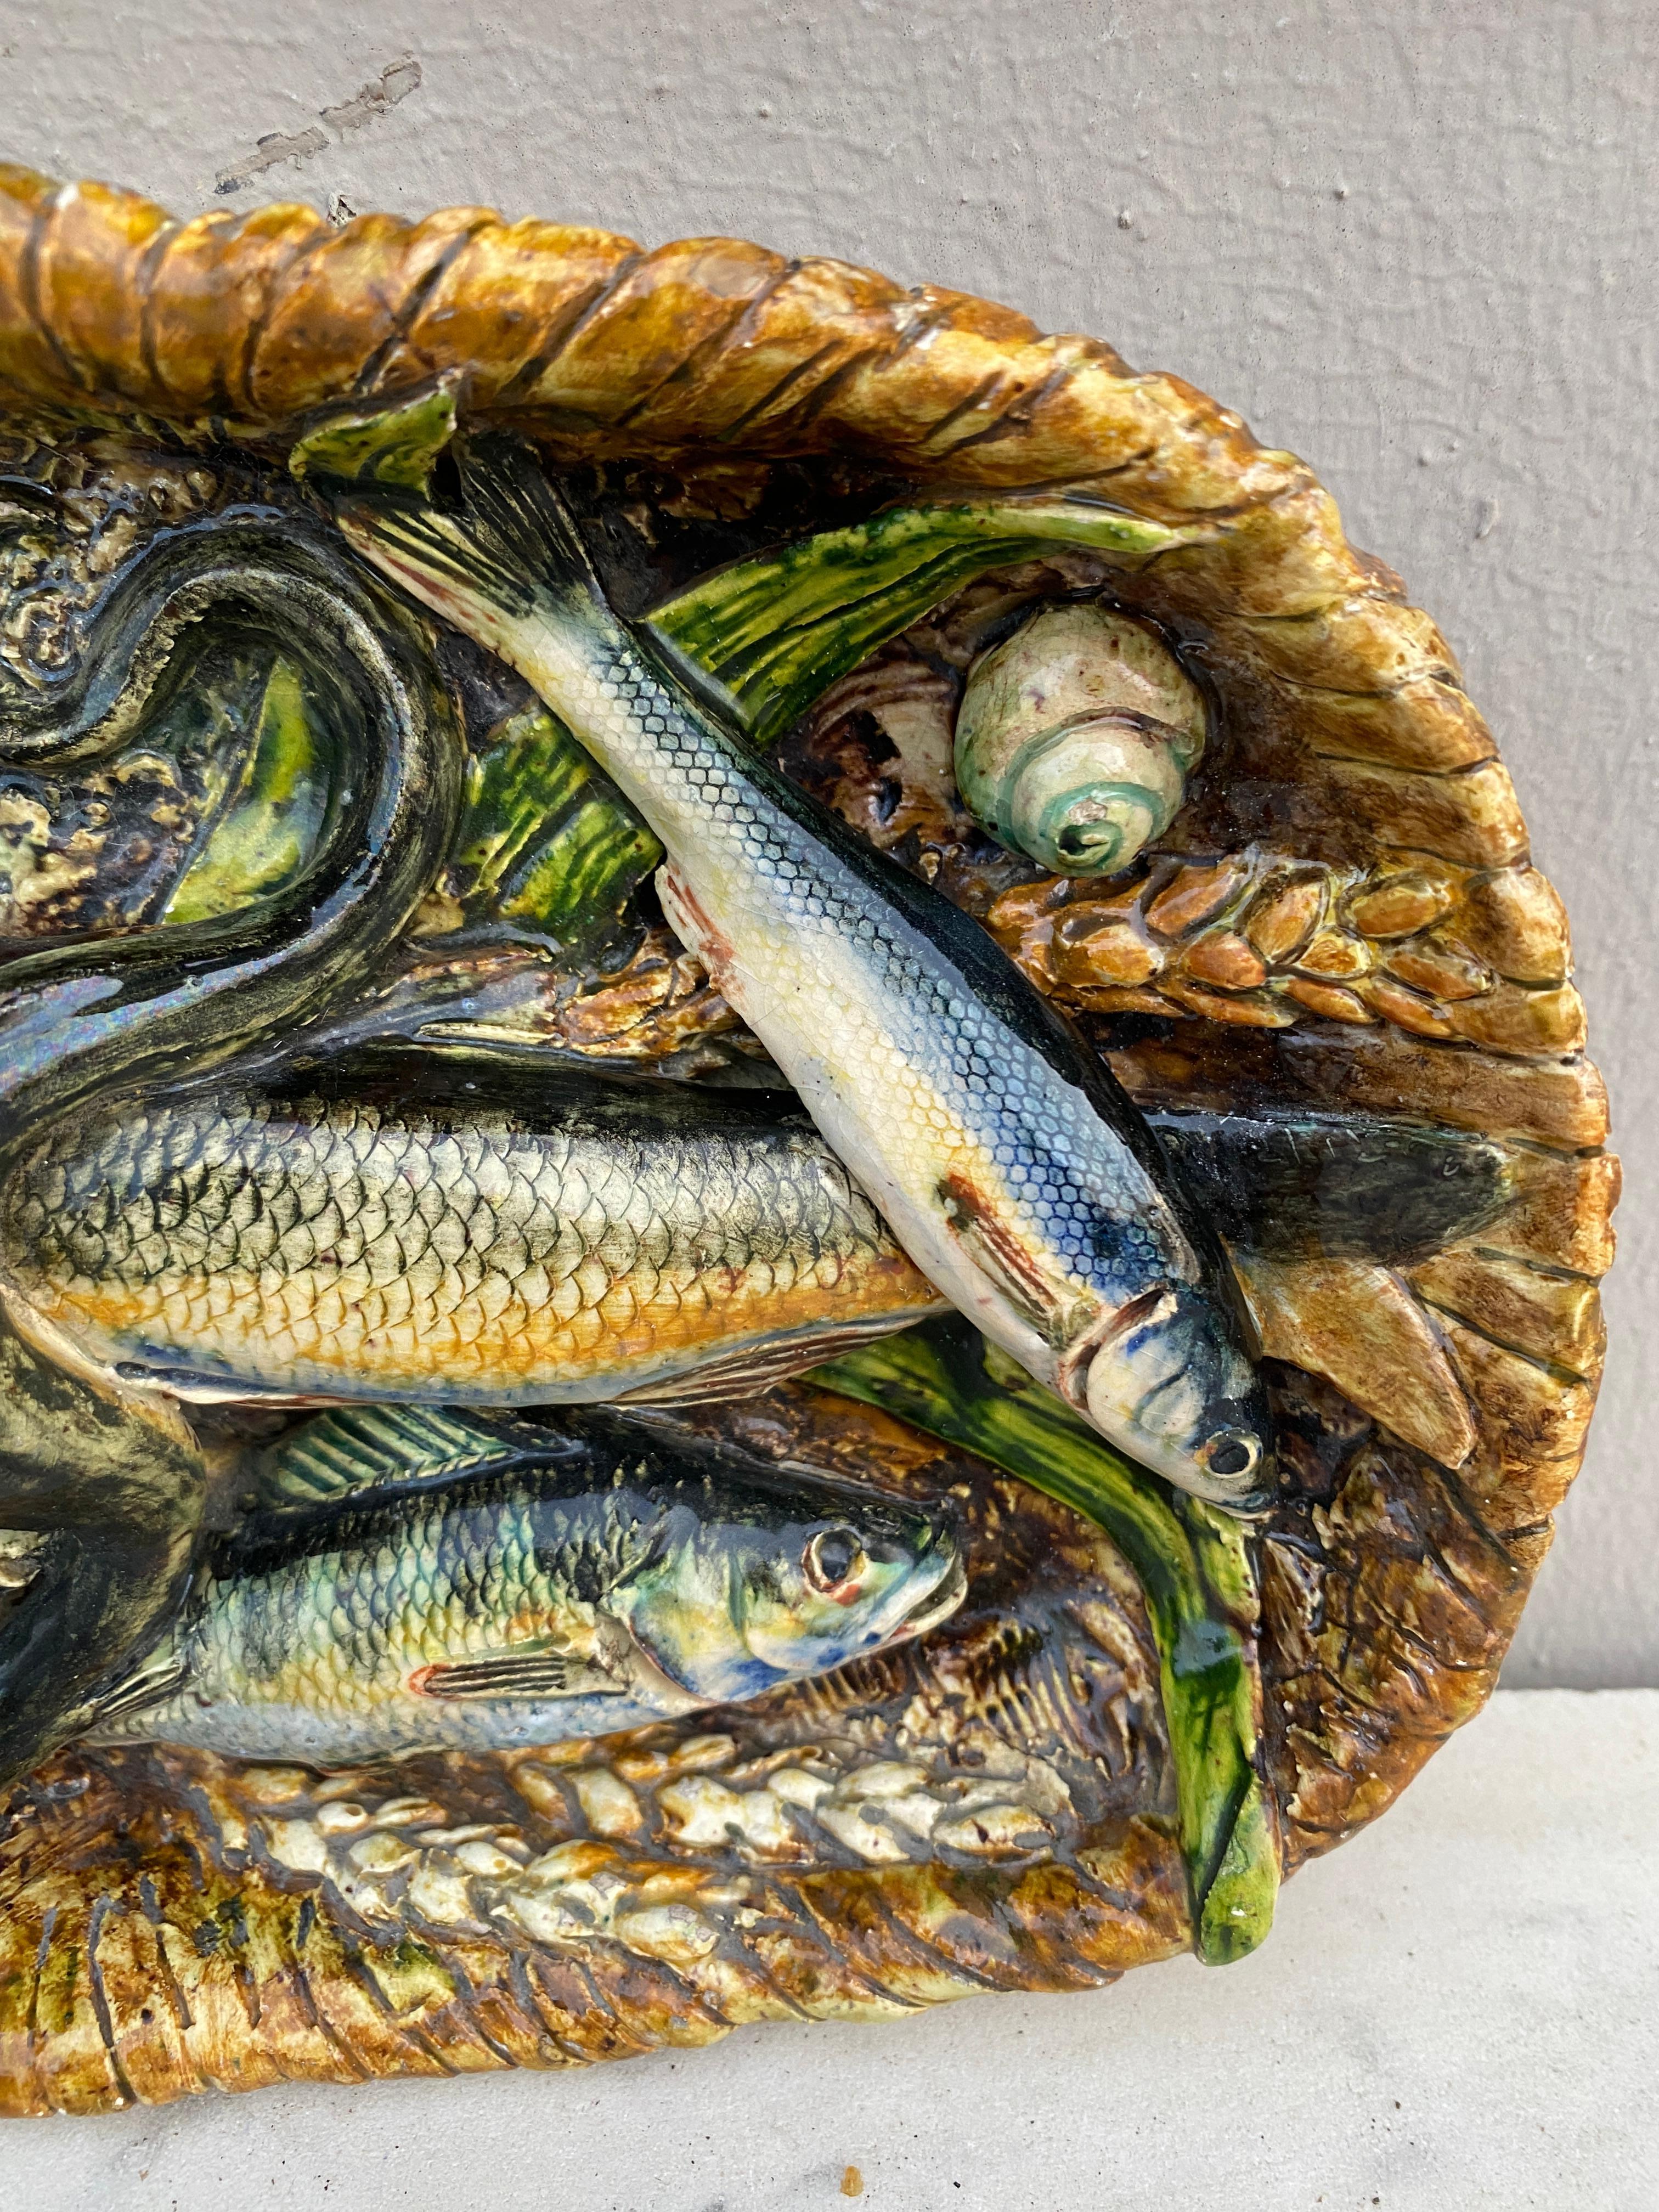 19th Century rare majolica palissy fish basket platter signed Leon Brard.
7 fishs, eel ,ears of wheat ,and shells.